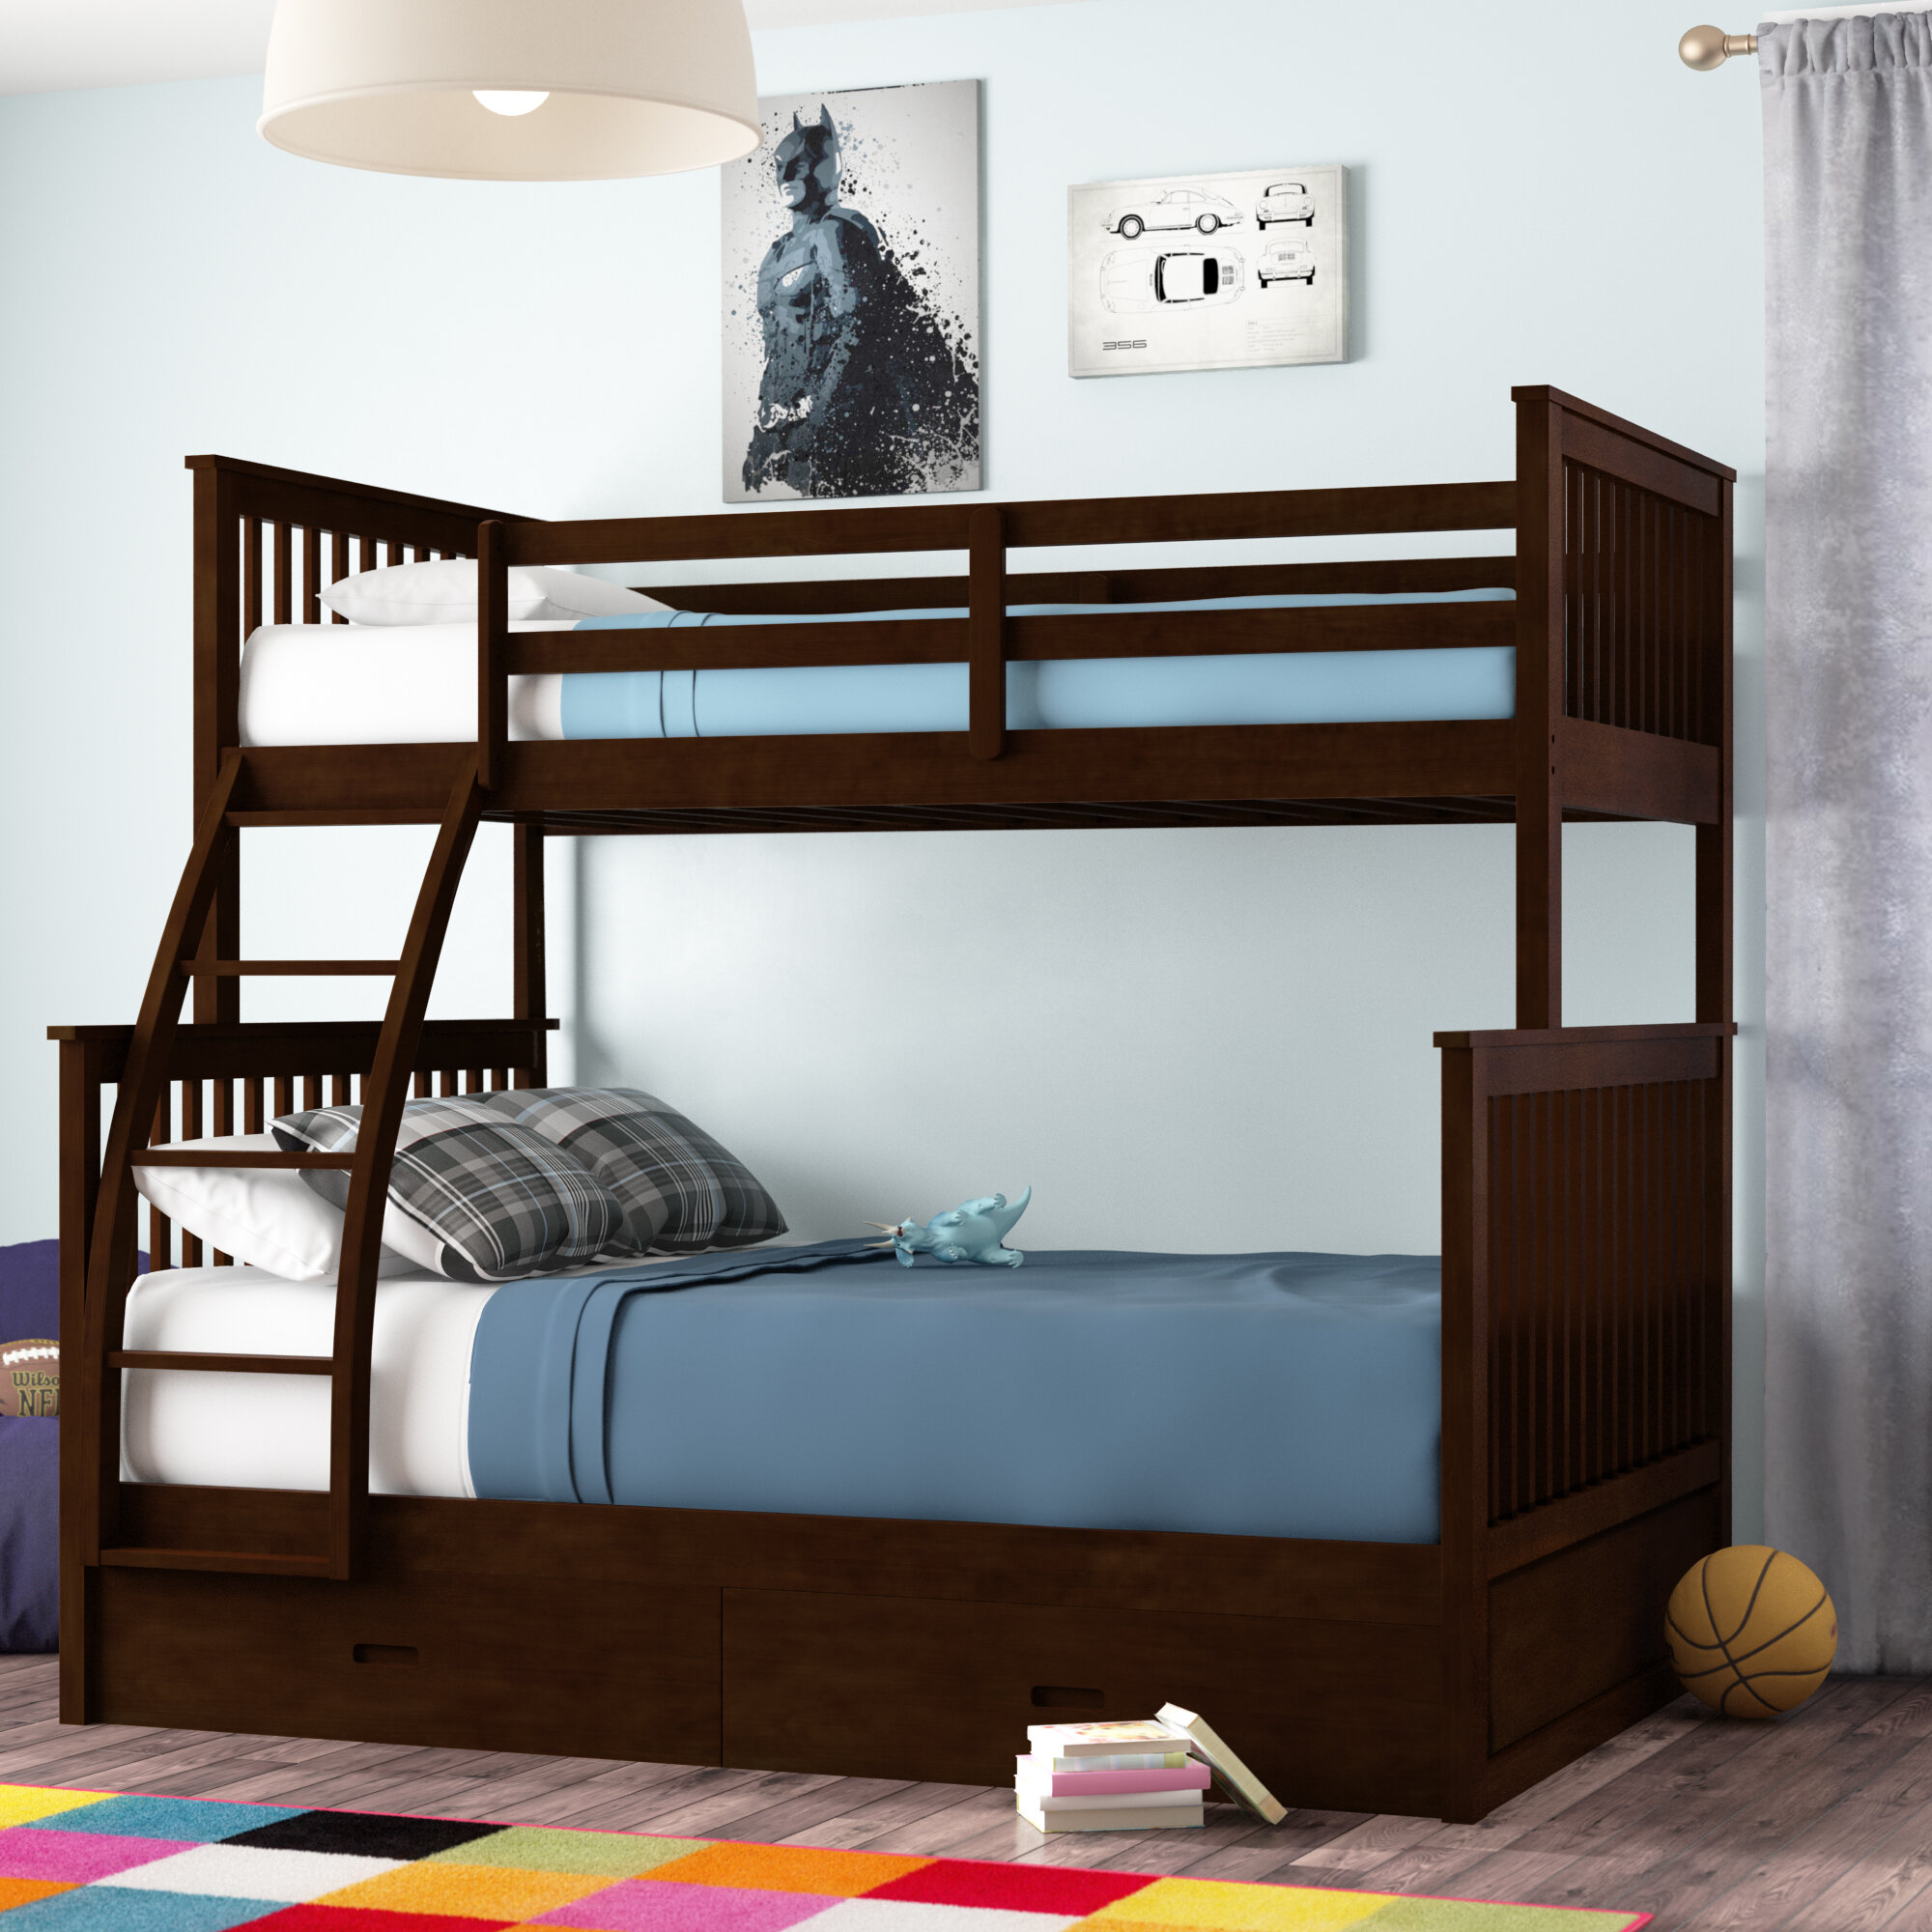 Bunk Mission Shaker Kids Beds You Ll Love In 2021 Wayfair